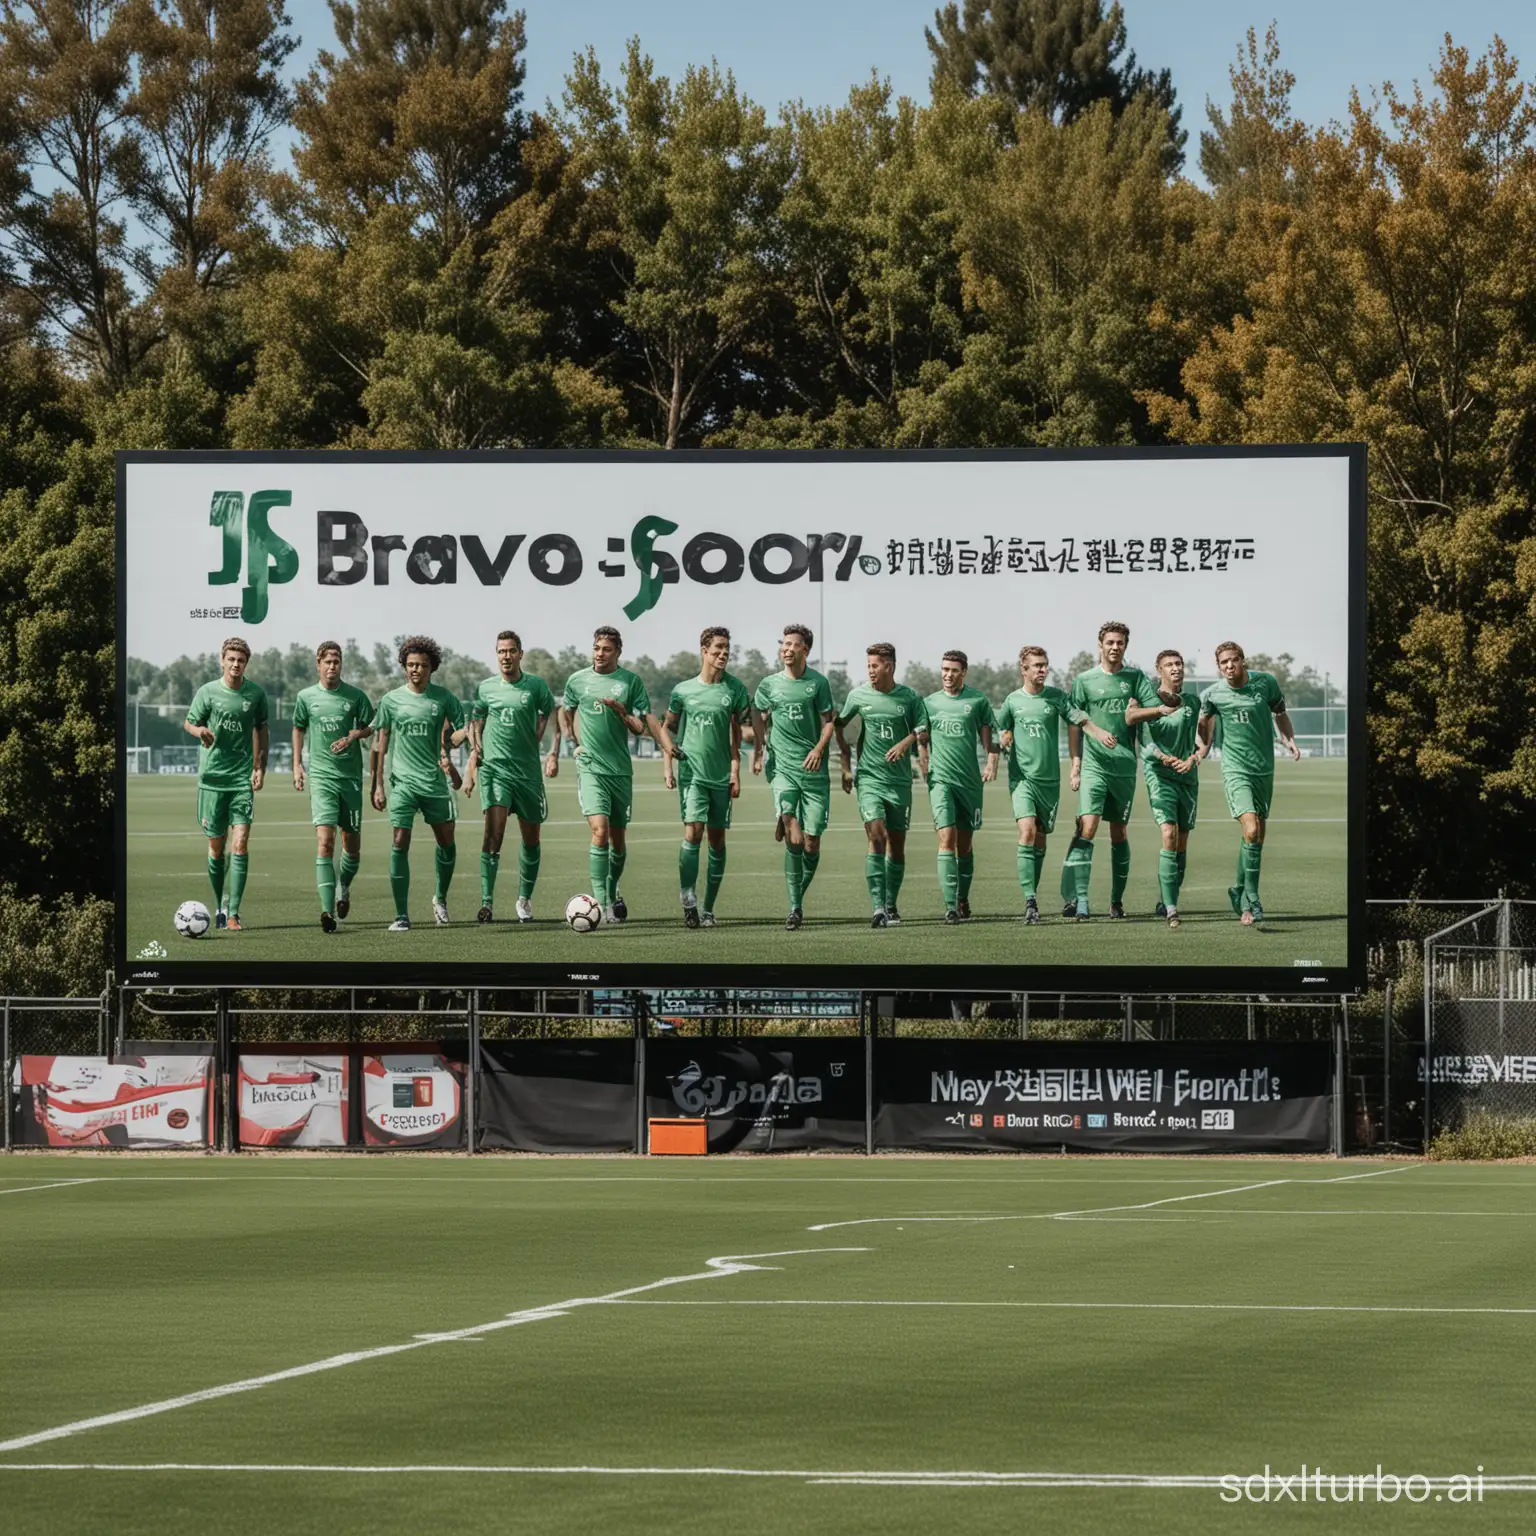 You can create 8 soccer players on a soccer field with a billboard advertising the name of JS BRAVO SPORT high up